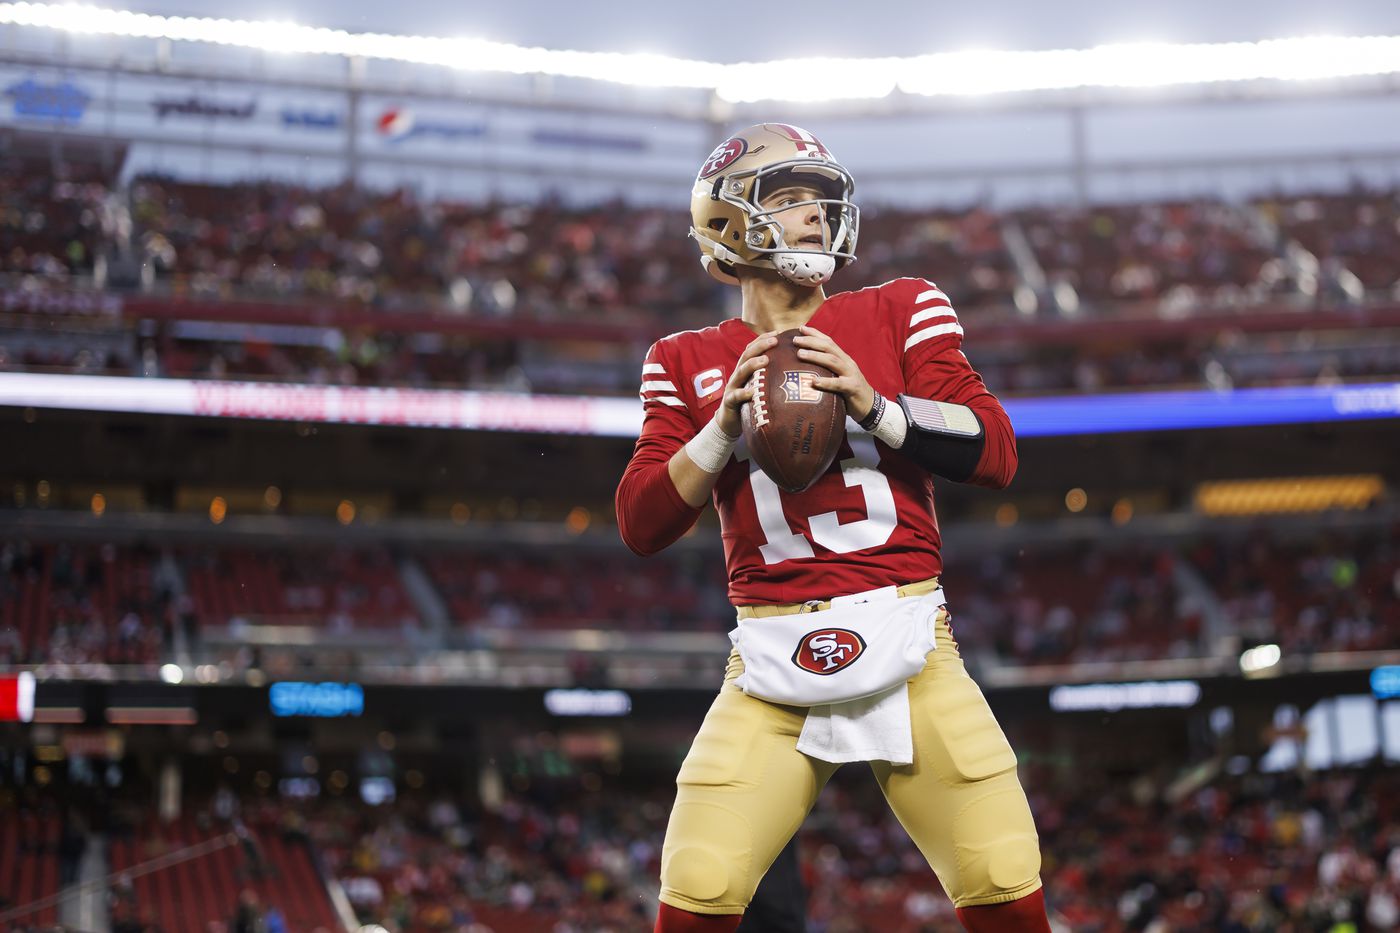 Lions vs 49ers 5Qs Preview: Brock Purdy raises offense to new heights